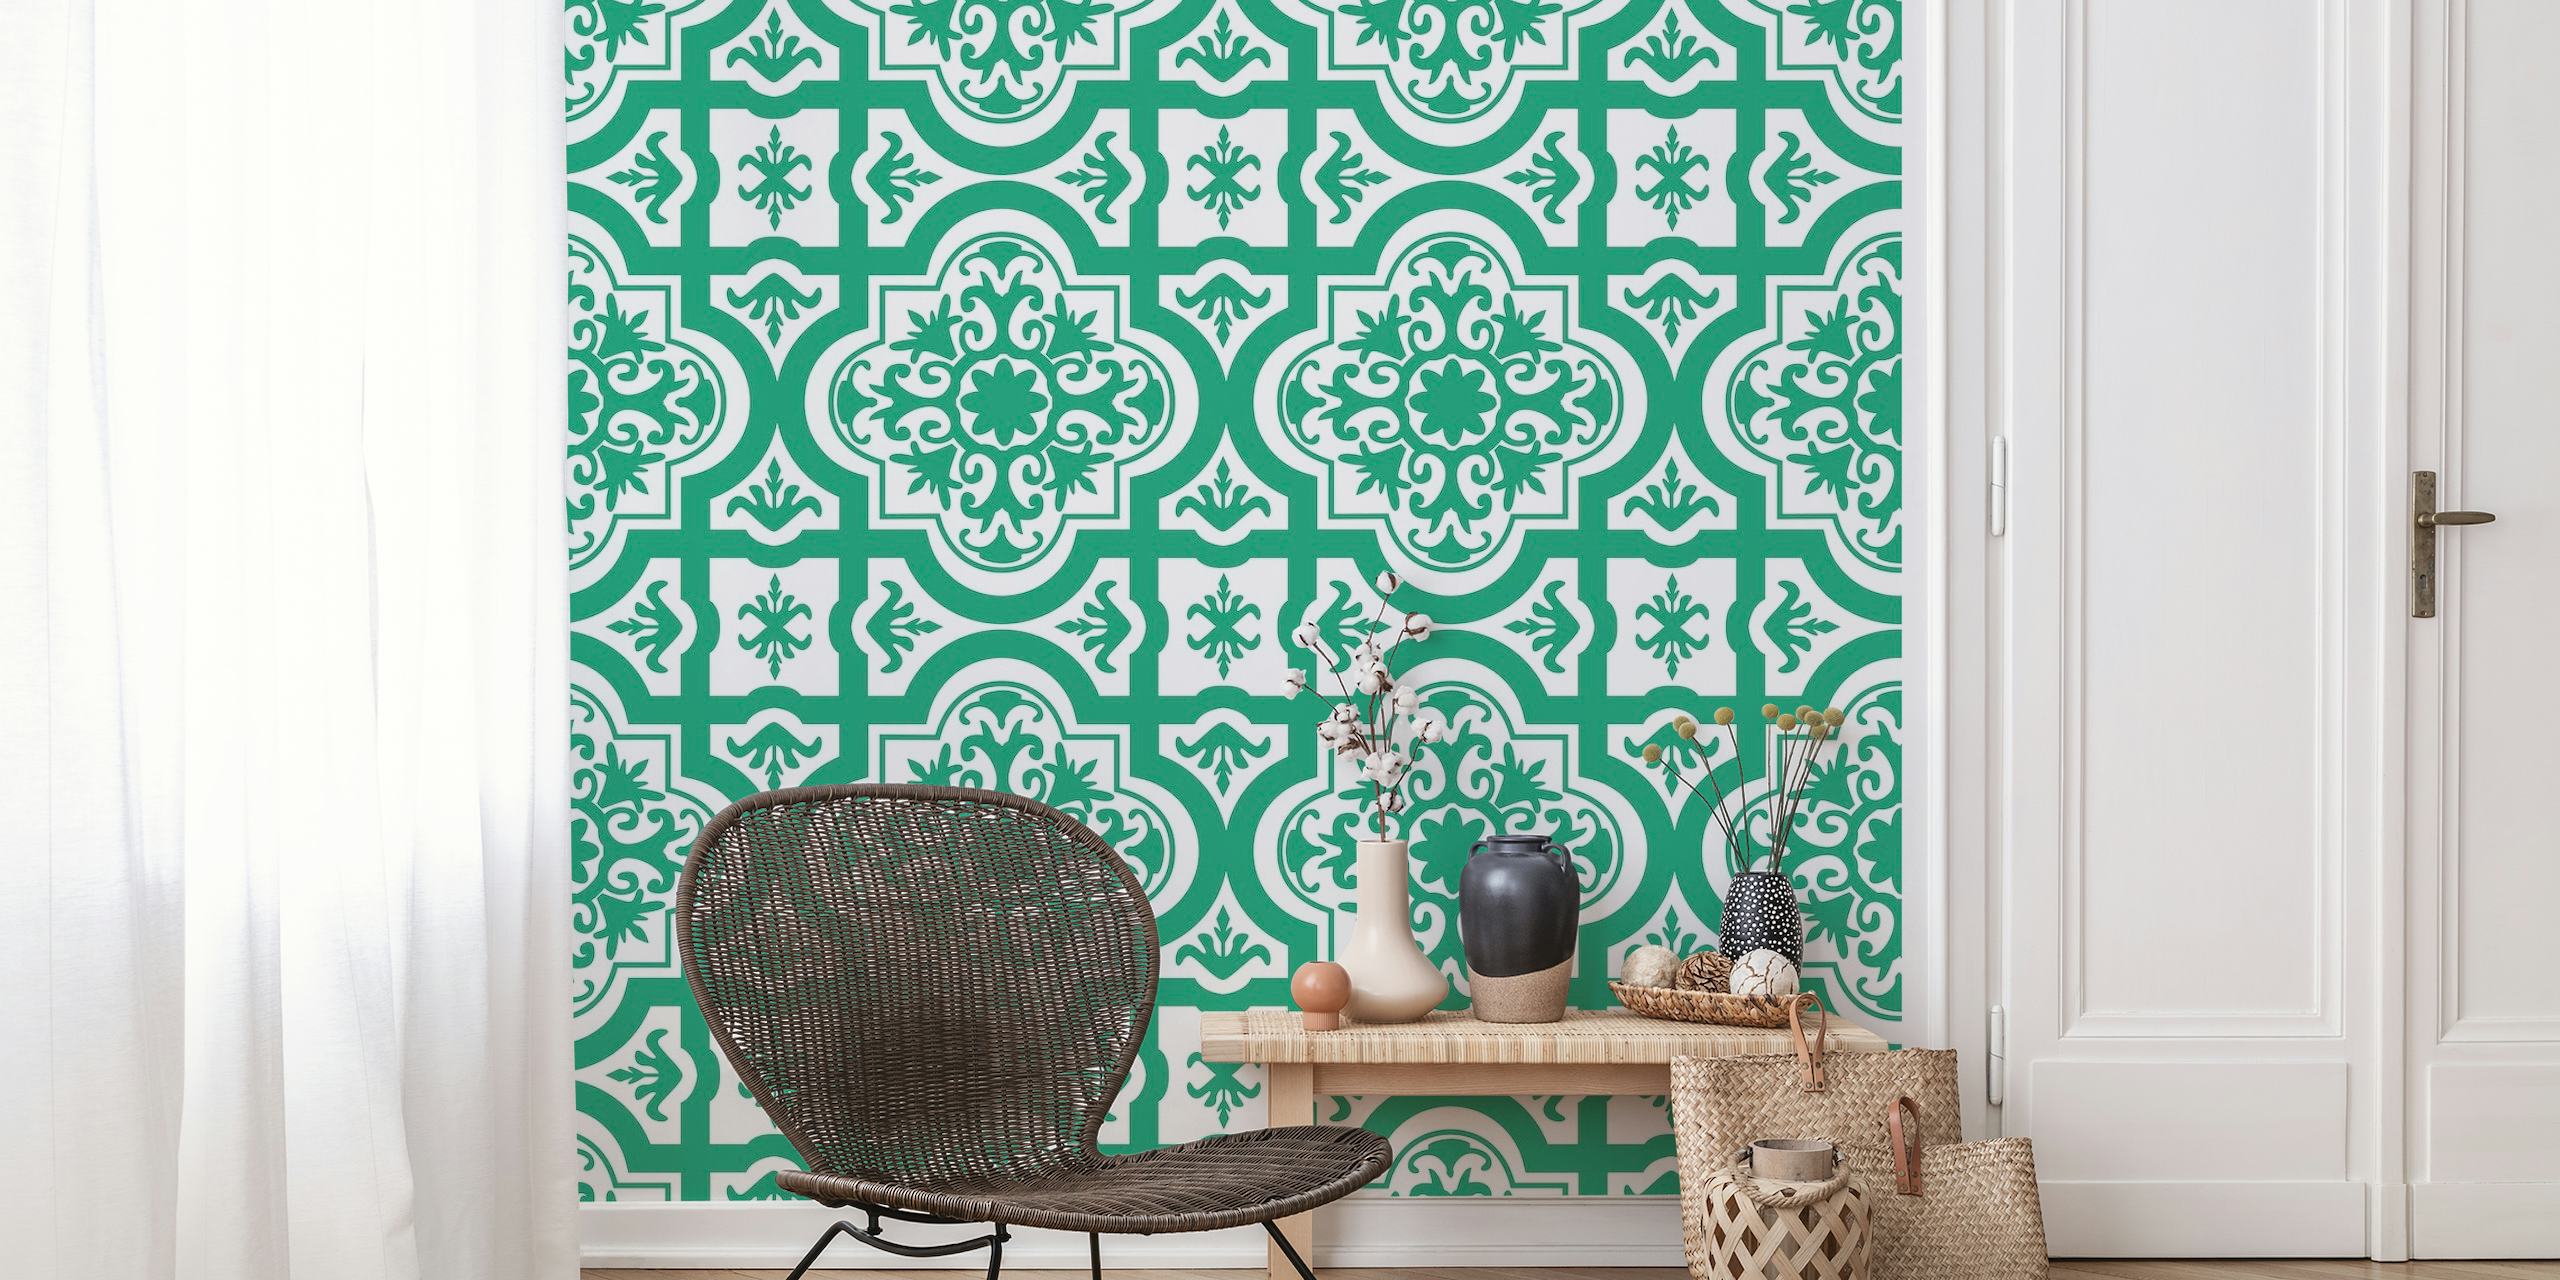 Turkish green and white ornate pattern wall mural